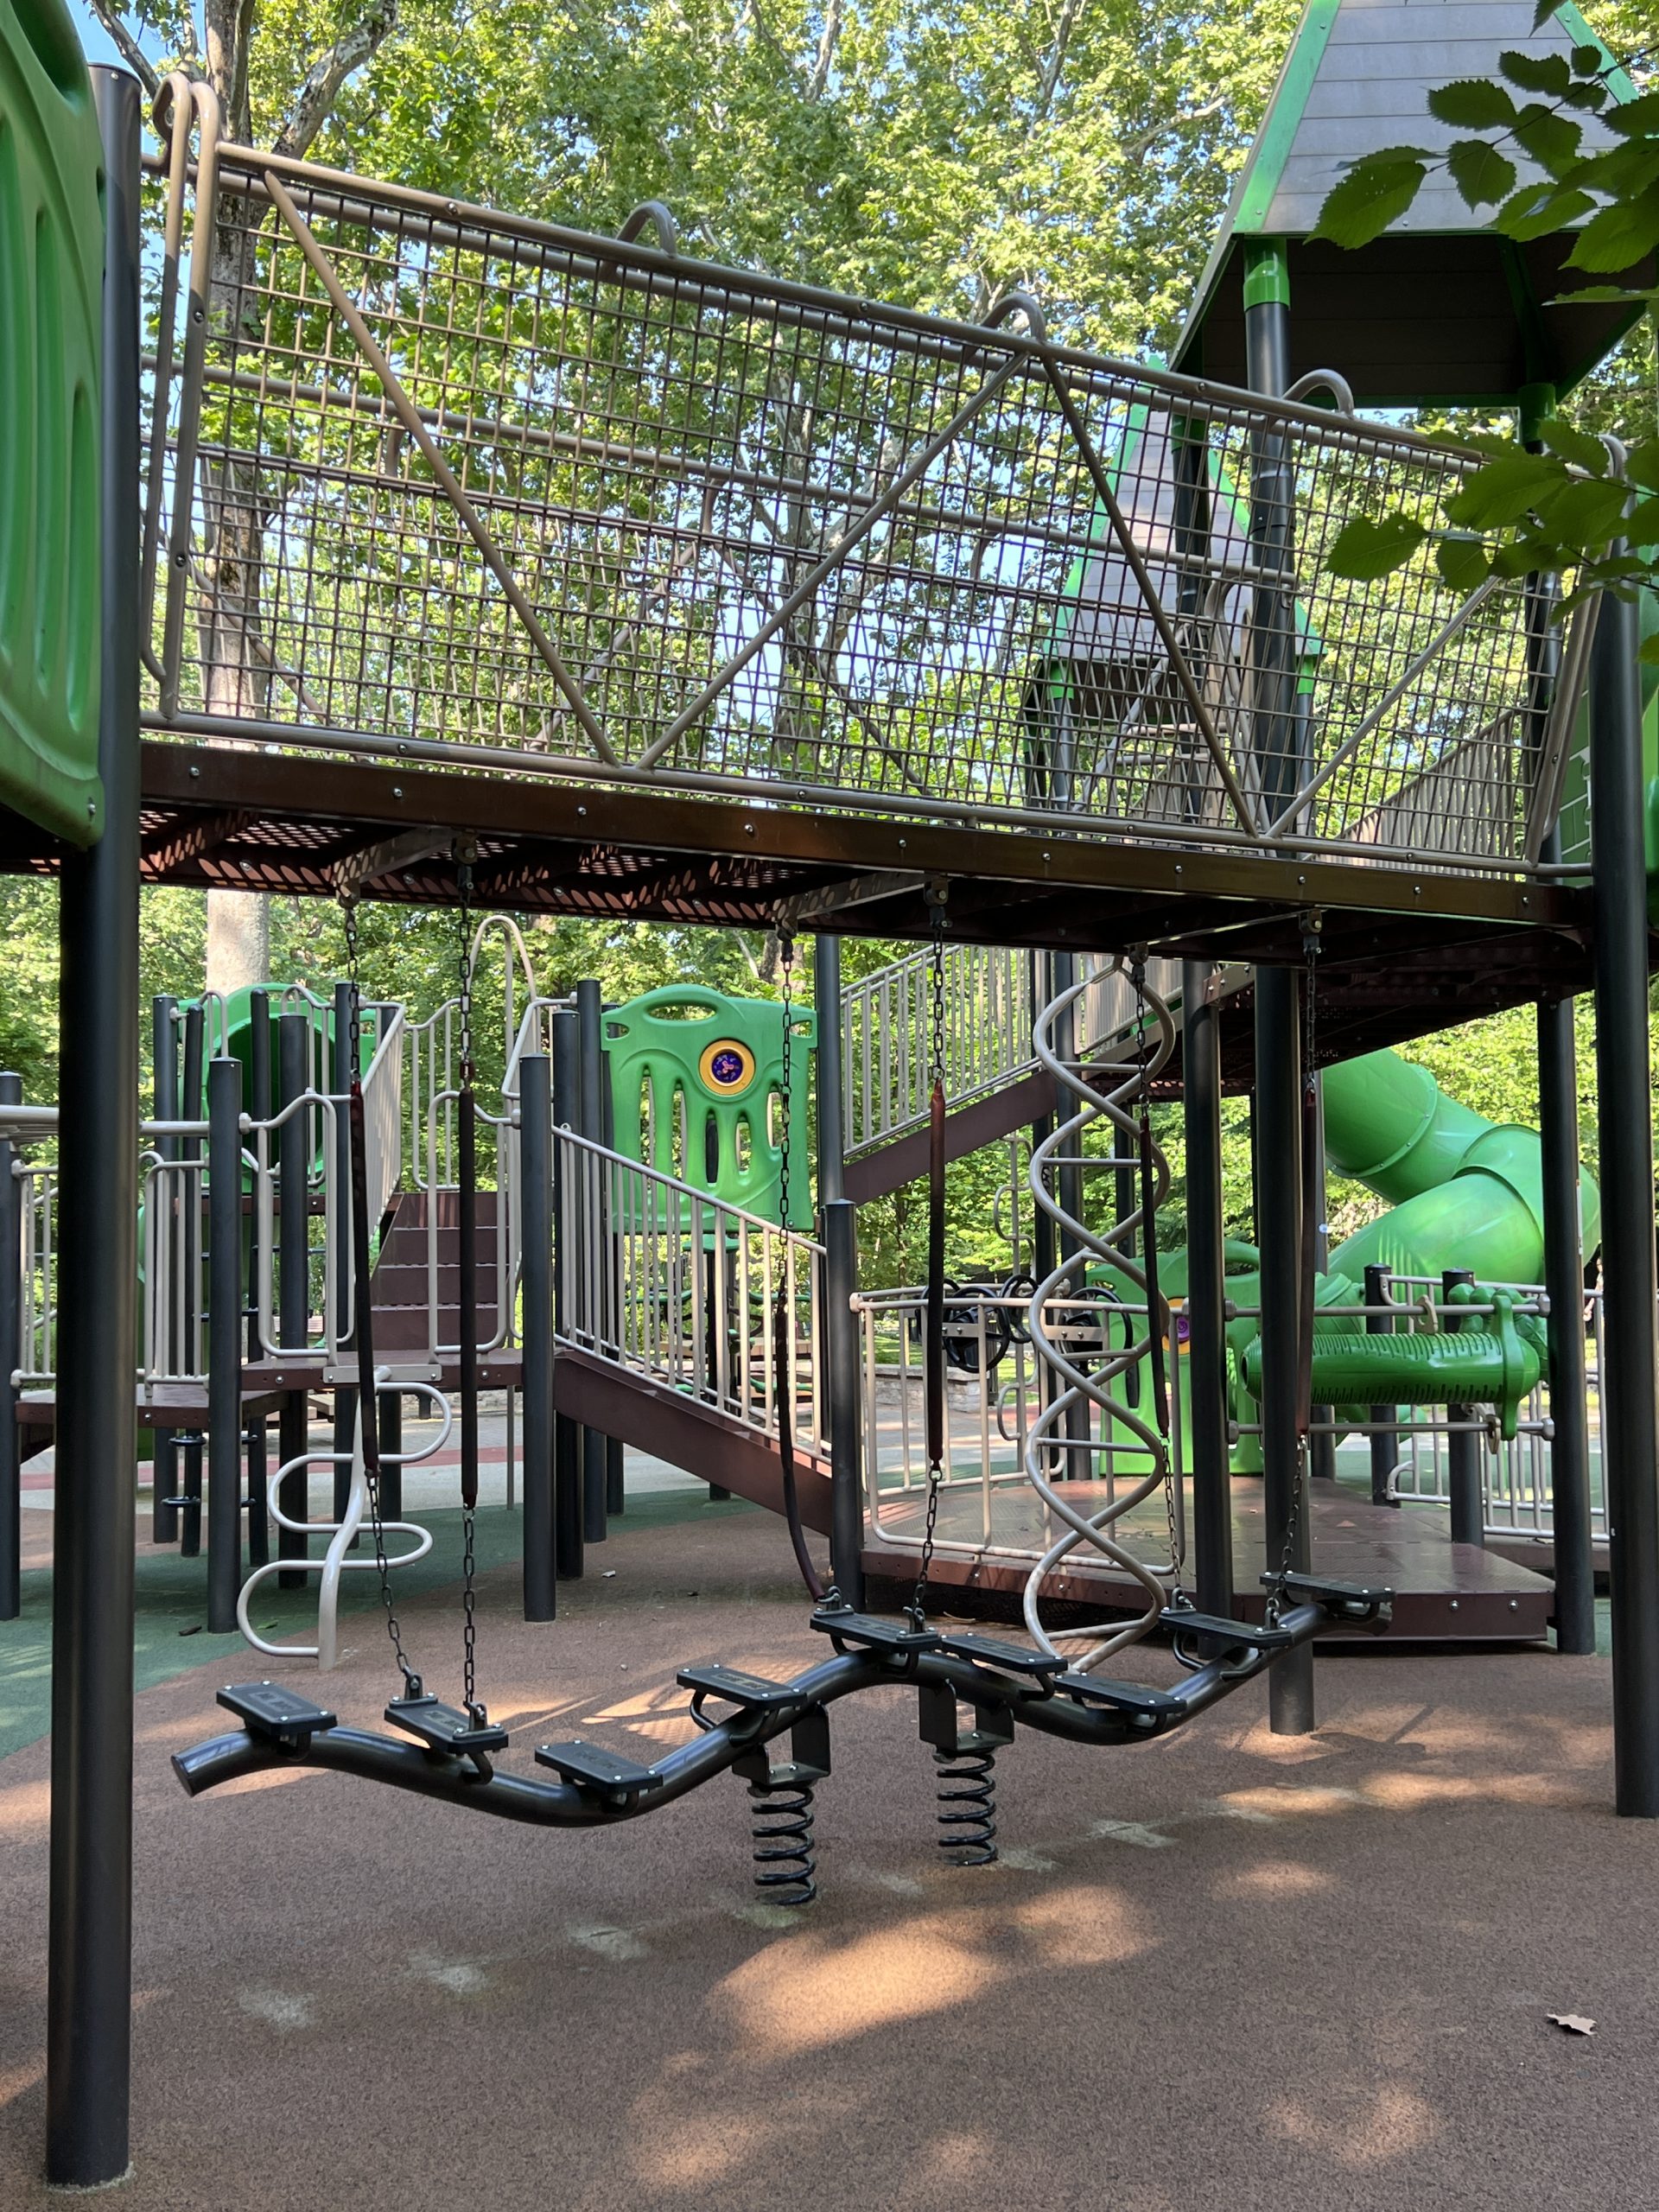 Grover Cleveland Playgrounds in Caldwell NJ - Large Playground Structure - Bridges and ladders